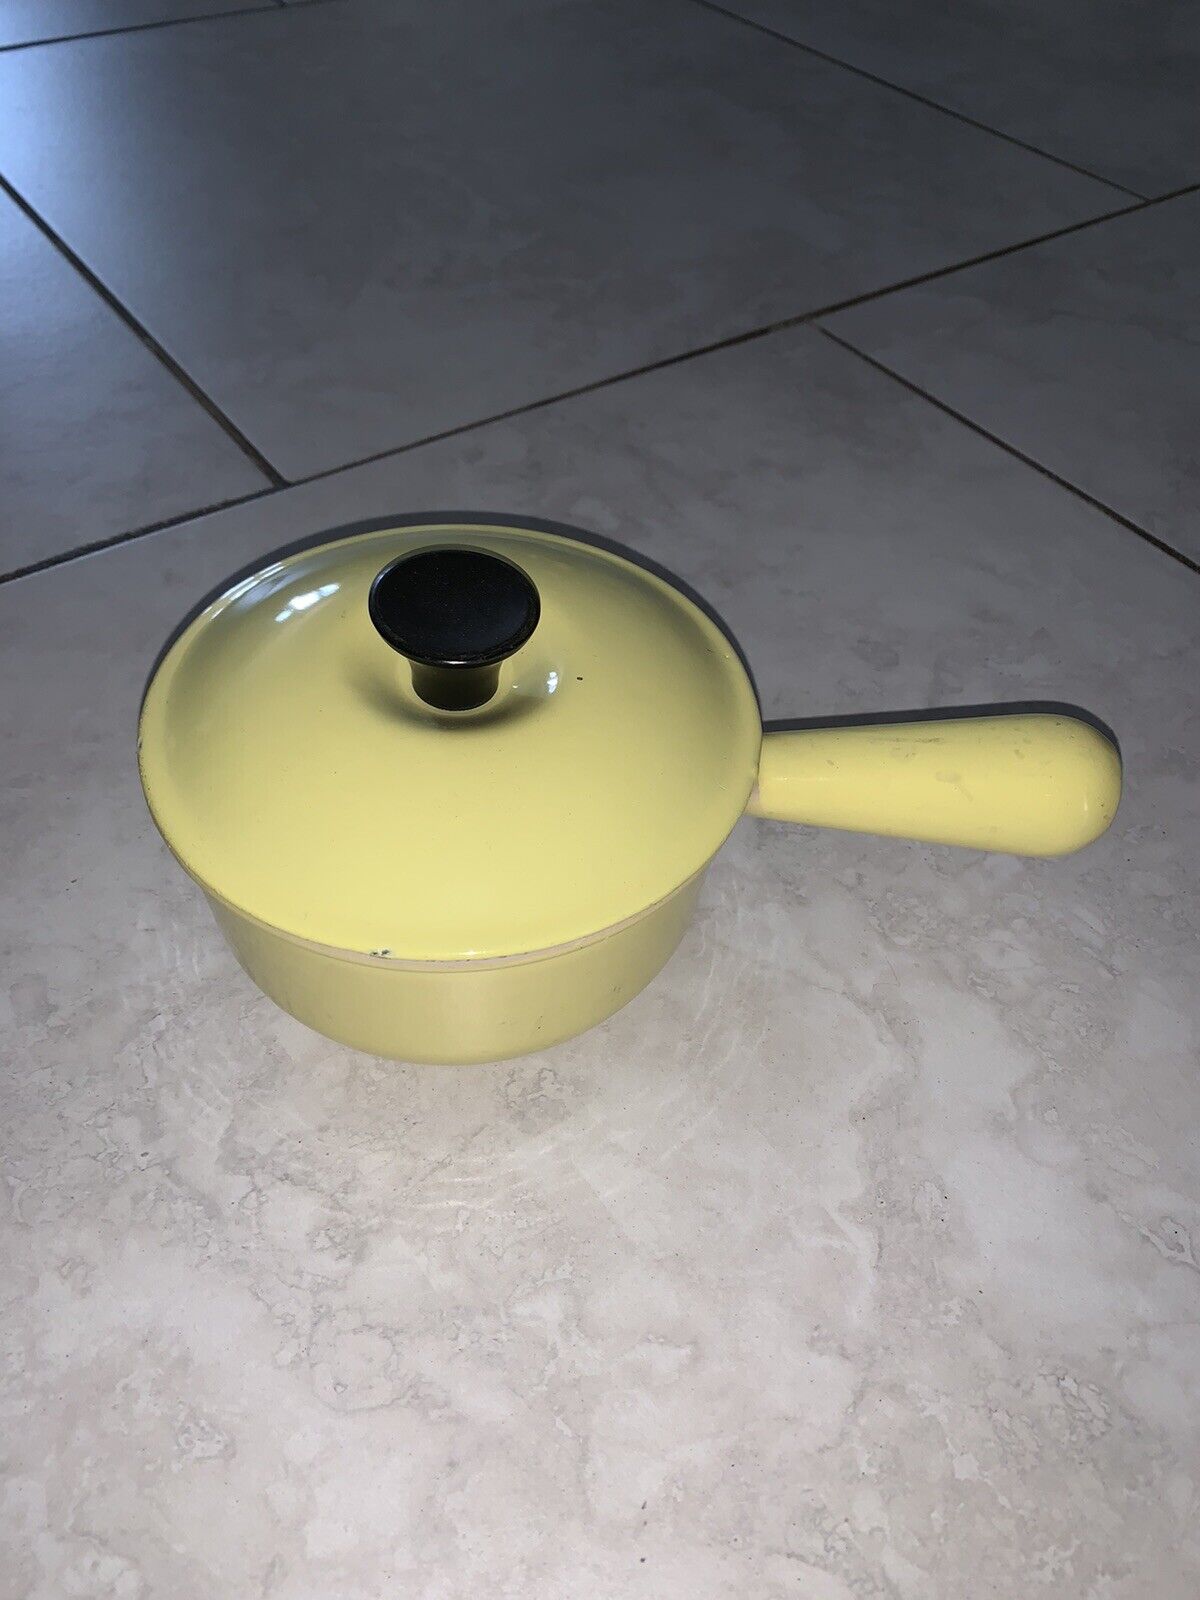 VINTAGE LE CREUSET Yellow CAST IRON HOLLOW HANDLE SAUCEPAN WITH LID #14